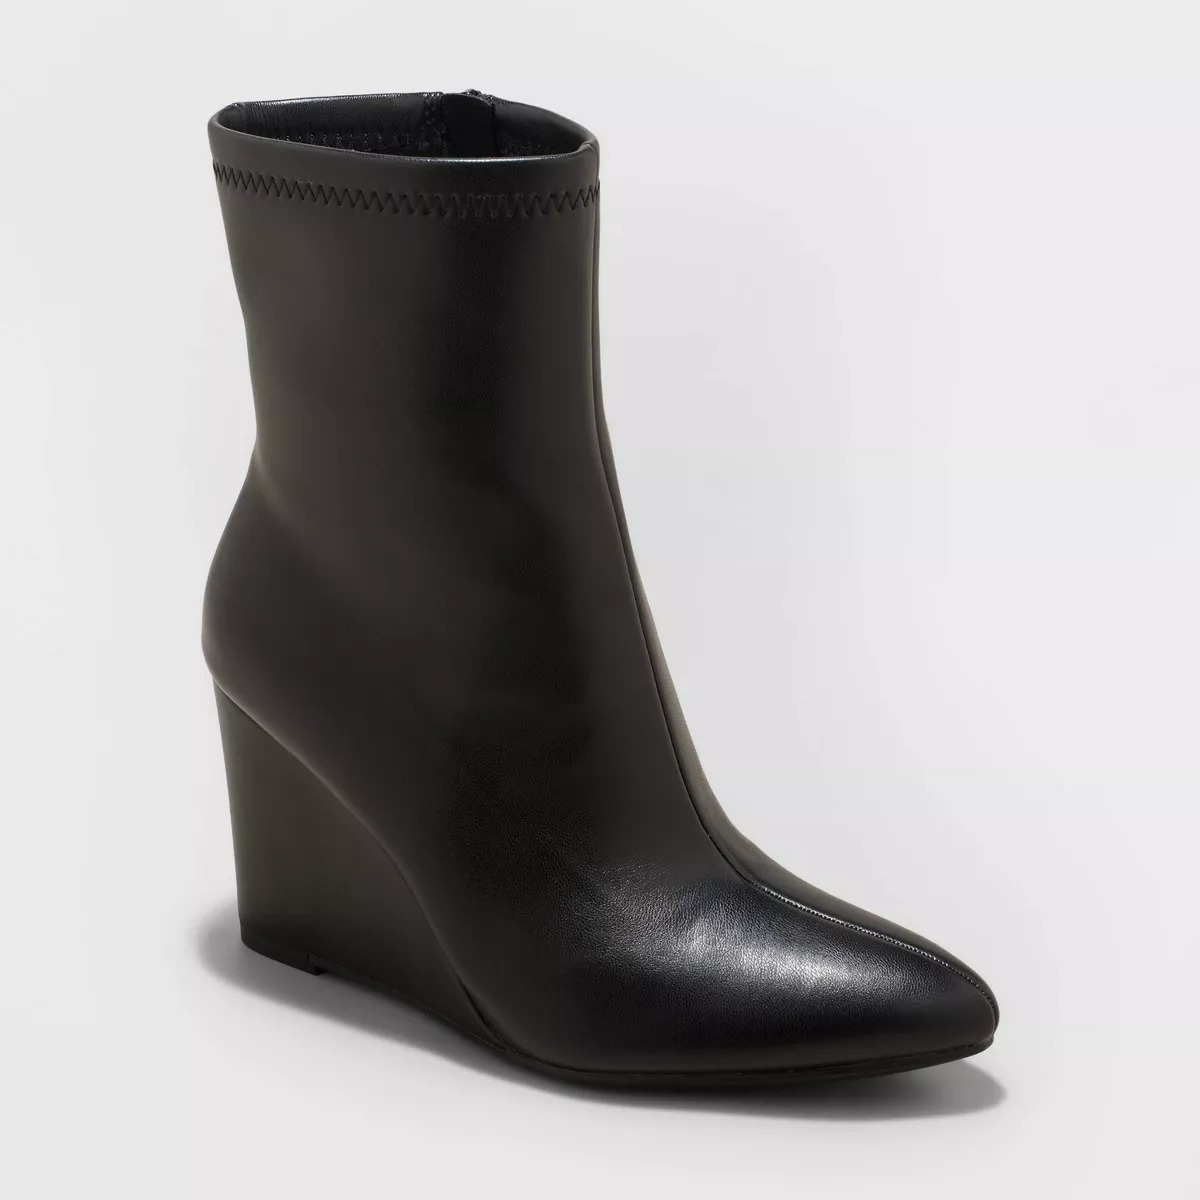 wedge black boots with pointed toe